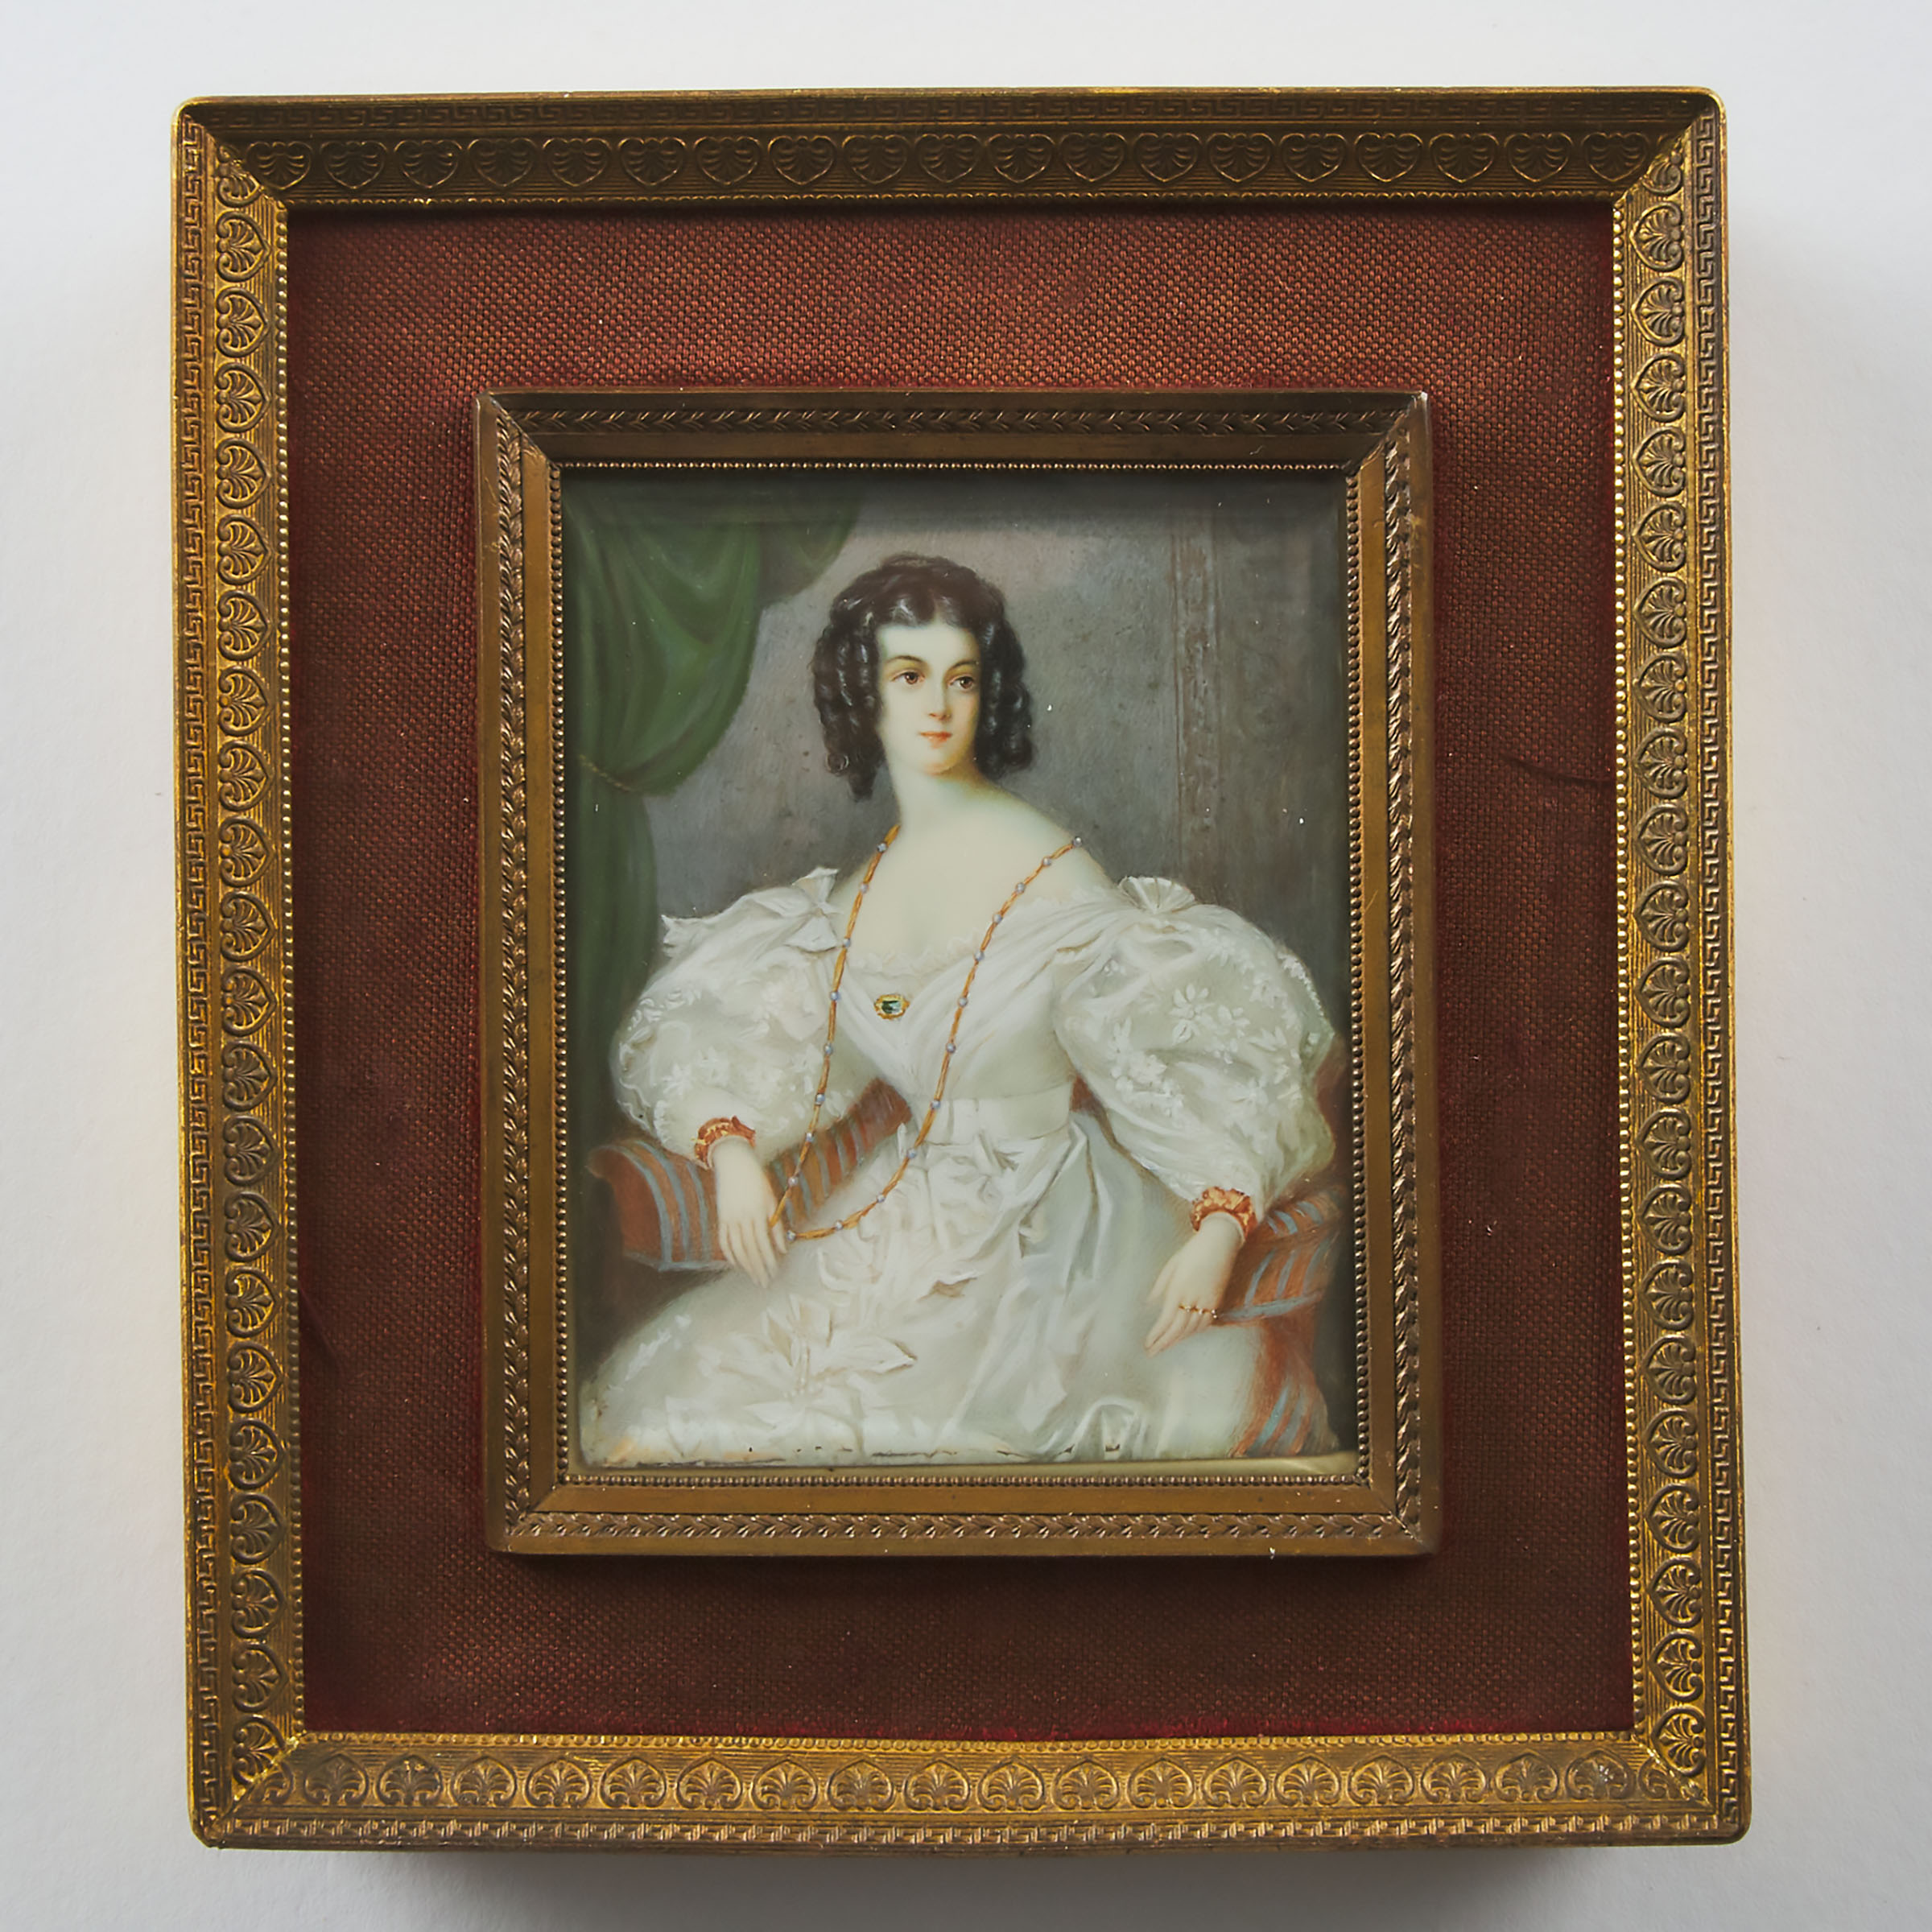 Continental School Portrait Miniature of a Young Woman in the Manner of Joseph Karl Stieler, 19th century